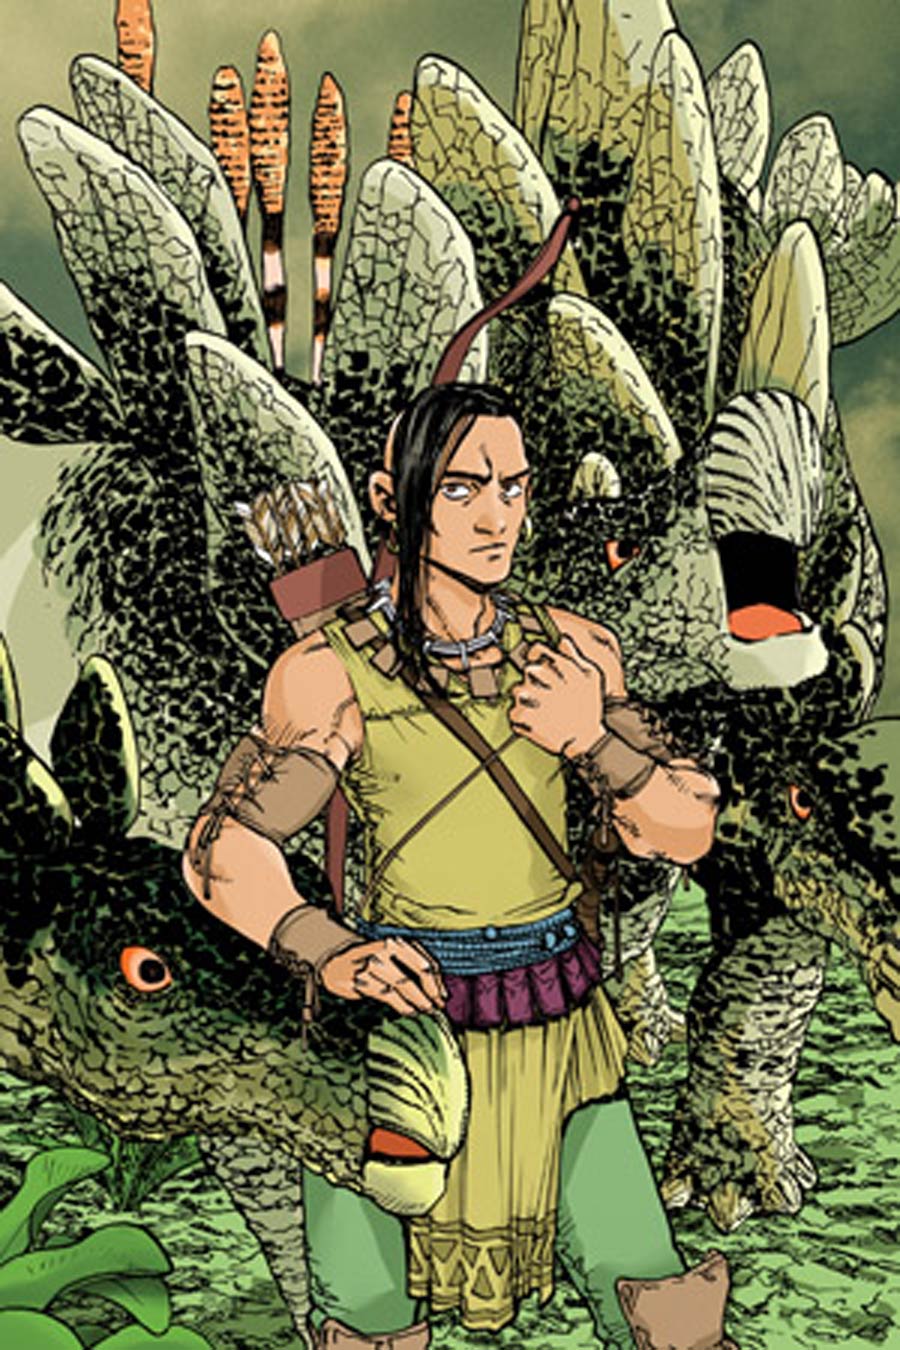 Turok Dinosaur Hunter Vol 2 #4 Cover G High-End Takeshi Miyazawa Virgin Art Ultra-Limited Variant Cover (ONLY 25 COPIES IN EXISTENCE!)